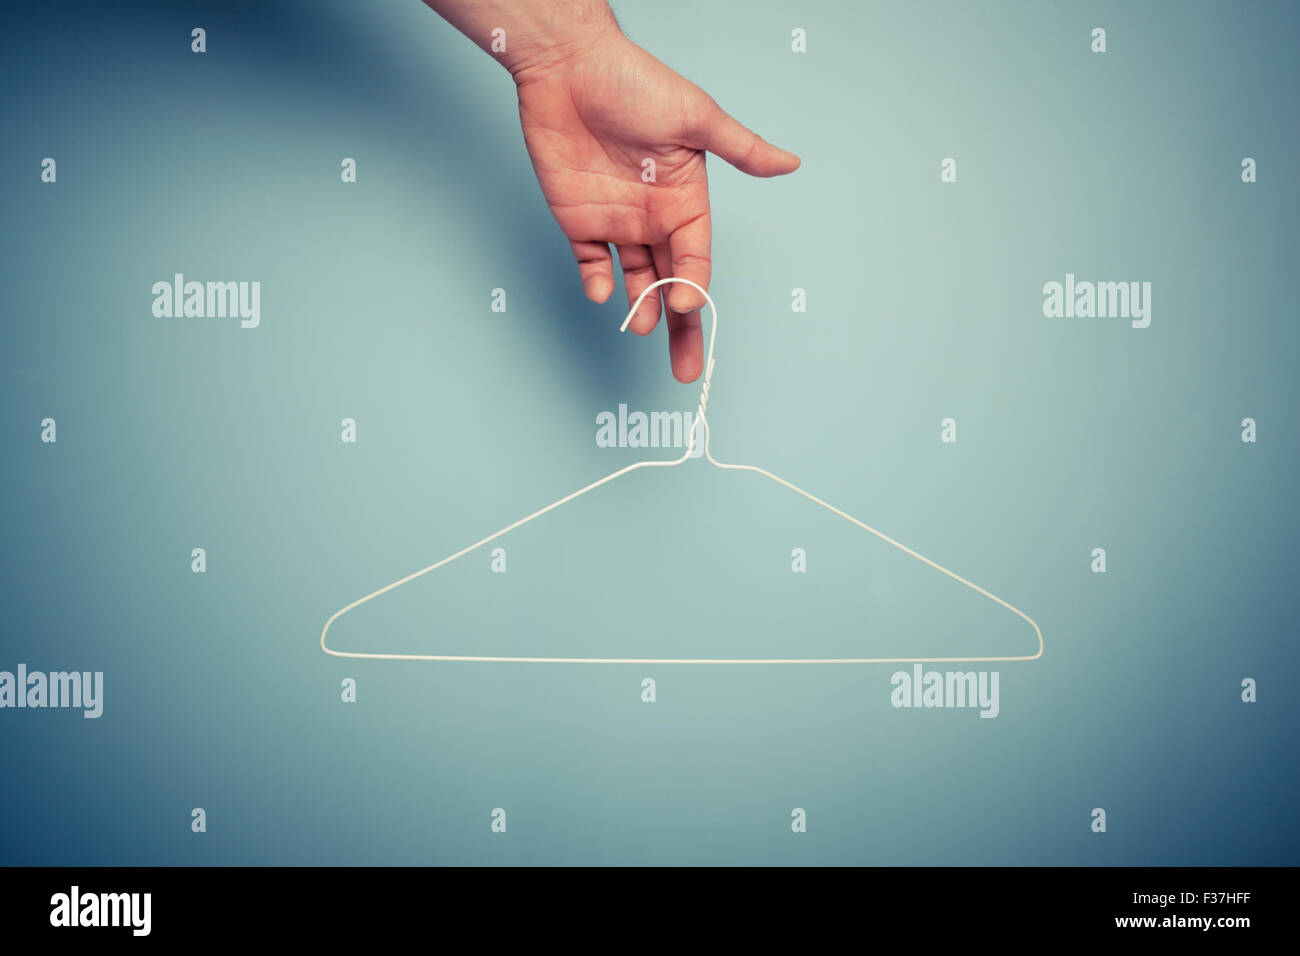 A Hand is holding a wire hanger Stock Photo